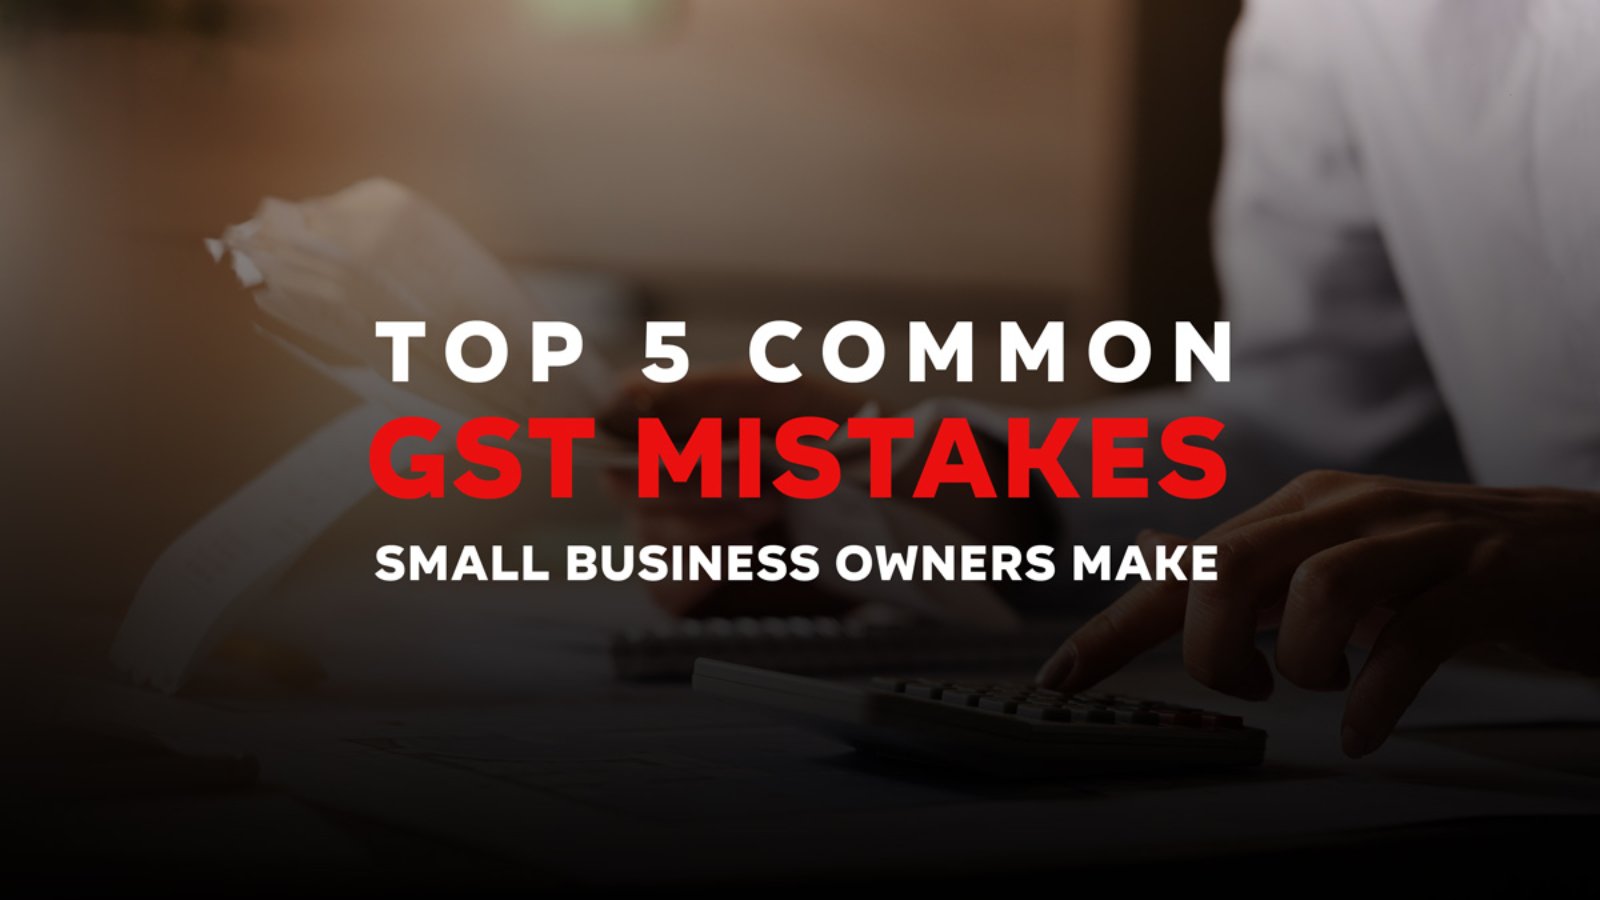 Top 5 Common GST Mistakes Small Business Owners Make